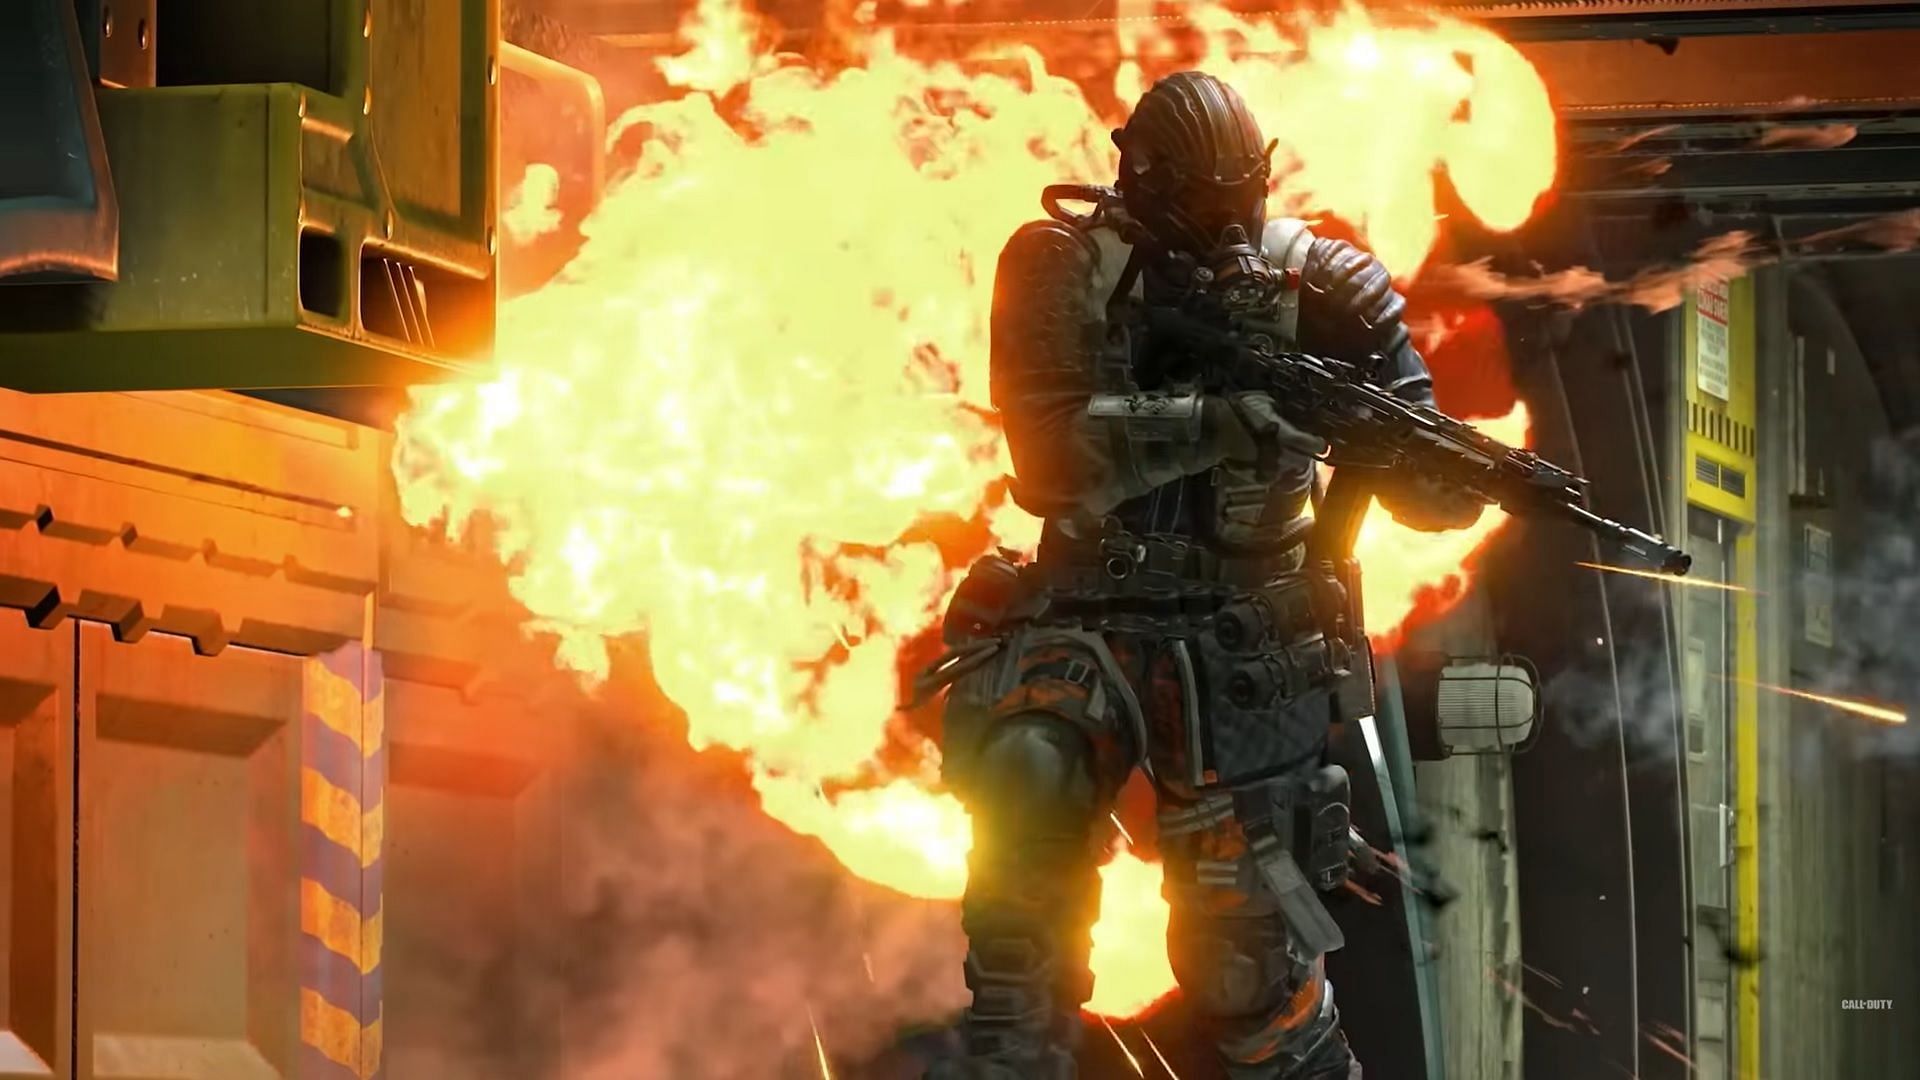 A leaked gameplay footage from a canceled Campaign mode of Black Ops 4 has recently surfaced online